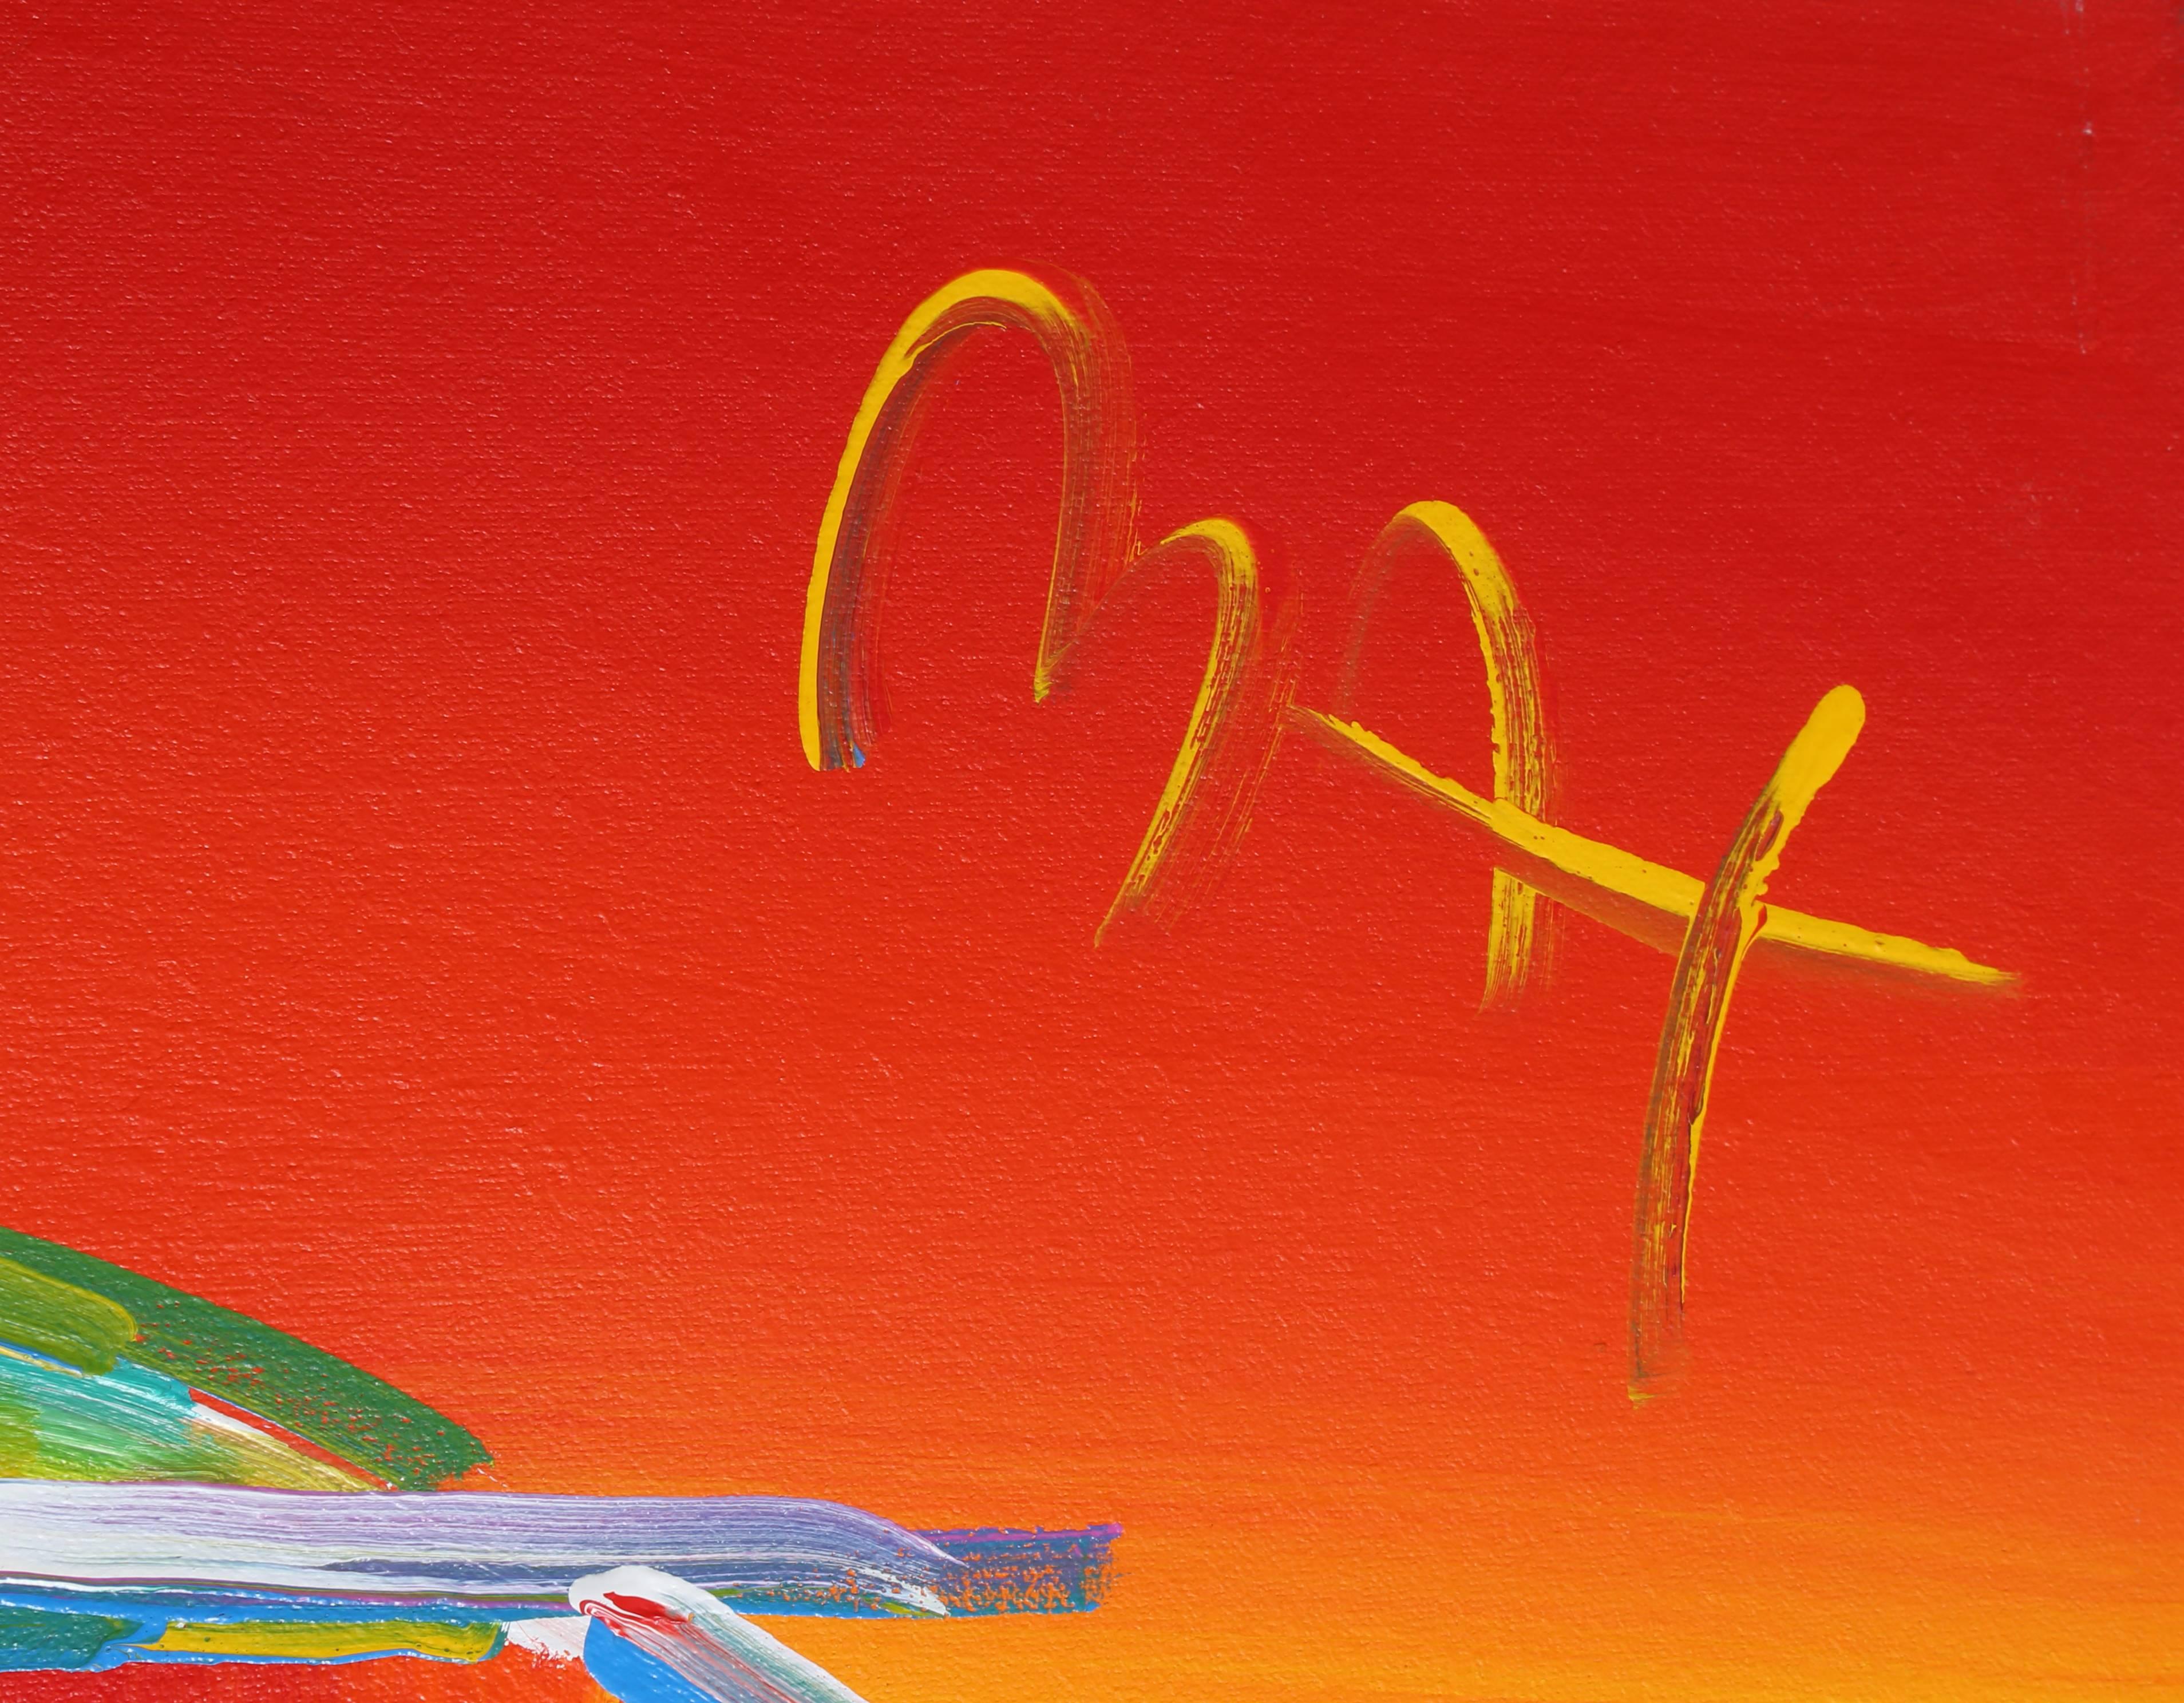 Rainbow Umbrella Man in Reeds Version IV #7 - Painting by Peter Max